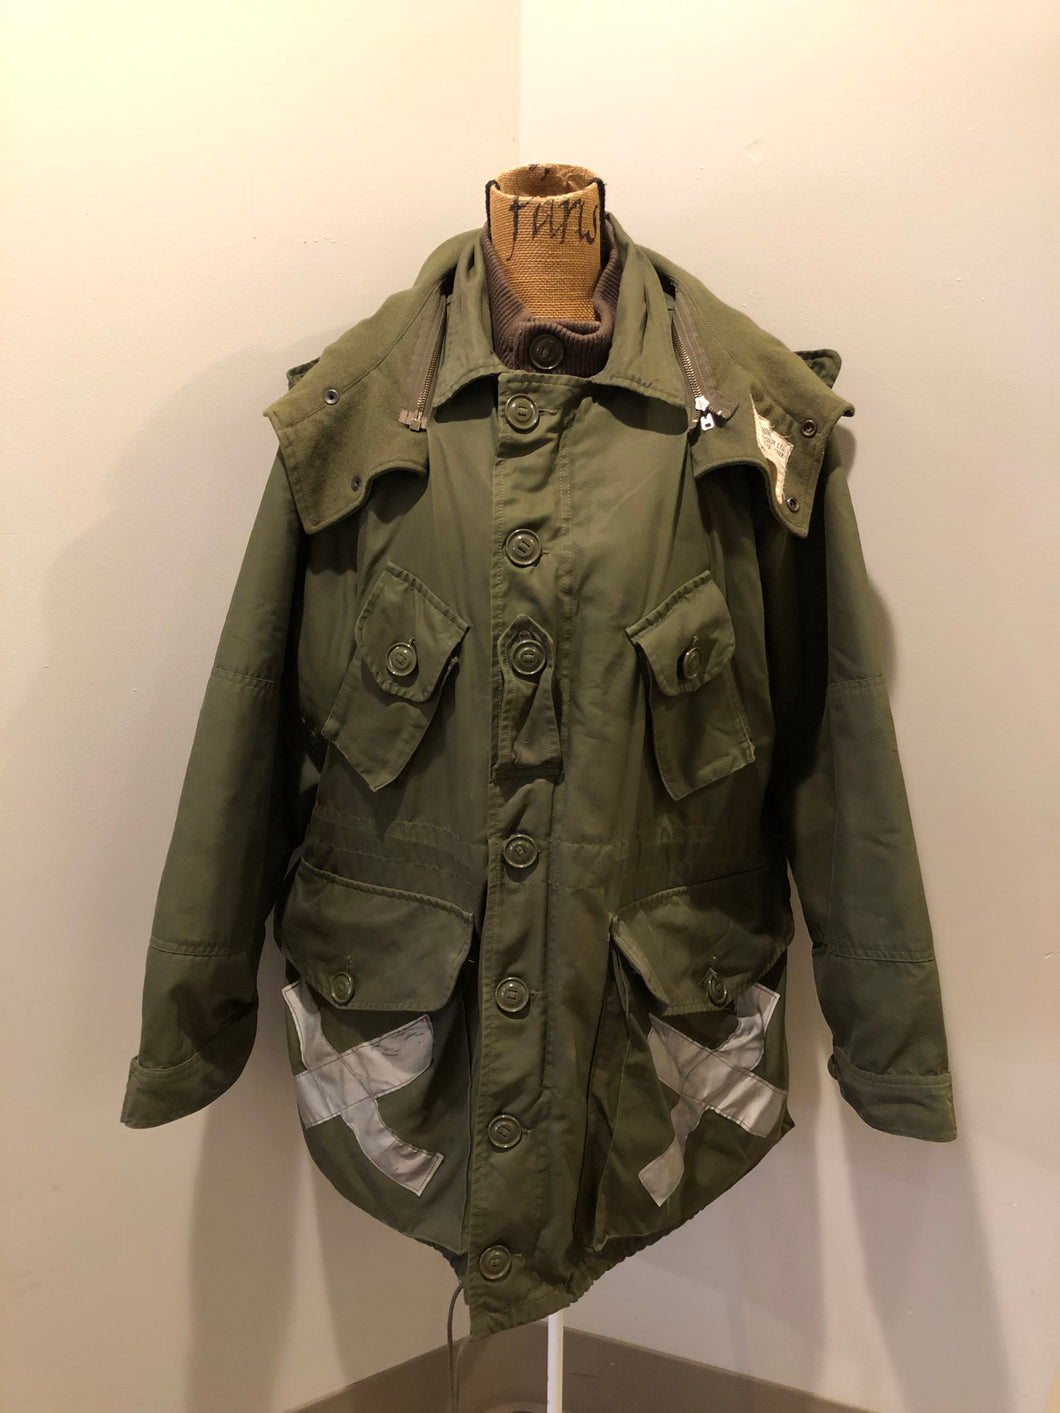 Kingspier Vintage - Canadian military surplus extreme cold parka in army green. The parka features zipper and buttons closure, flap pockets, knit collar, detachable hood, removable quilted lining and bottom hem drawstring. Size large. 